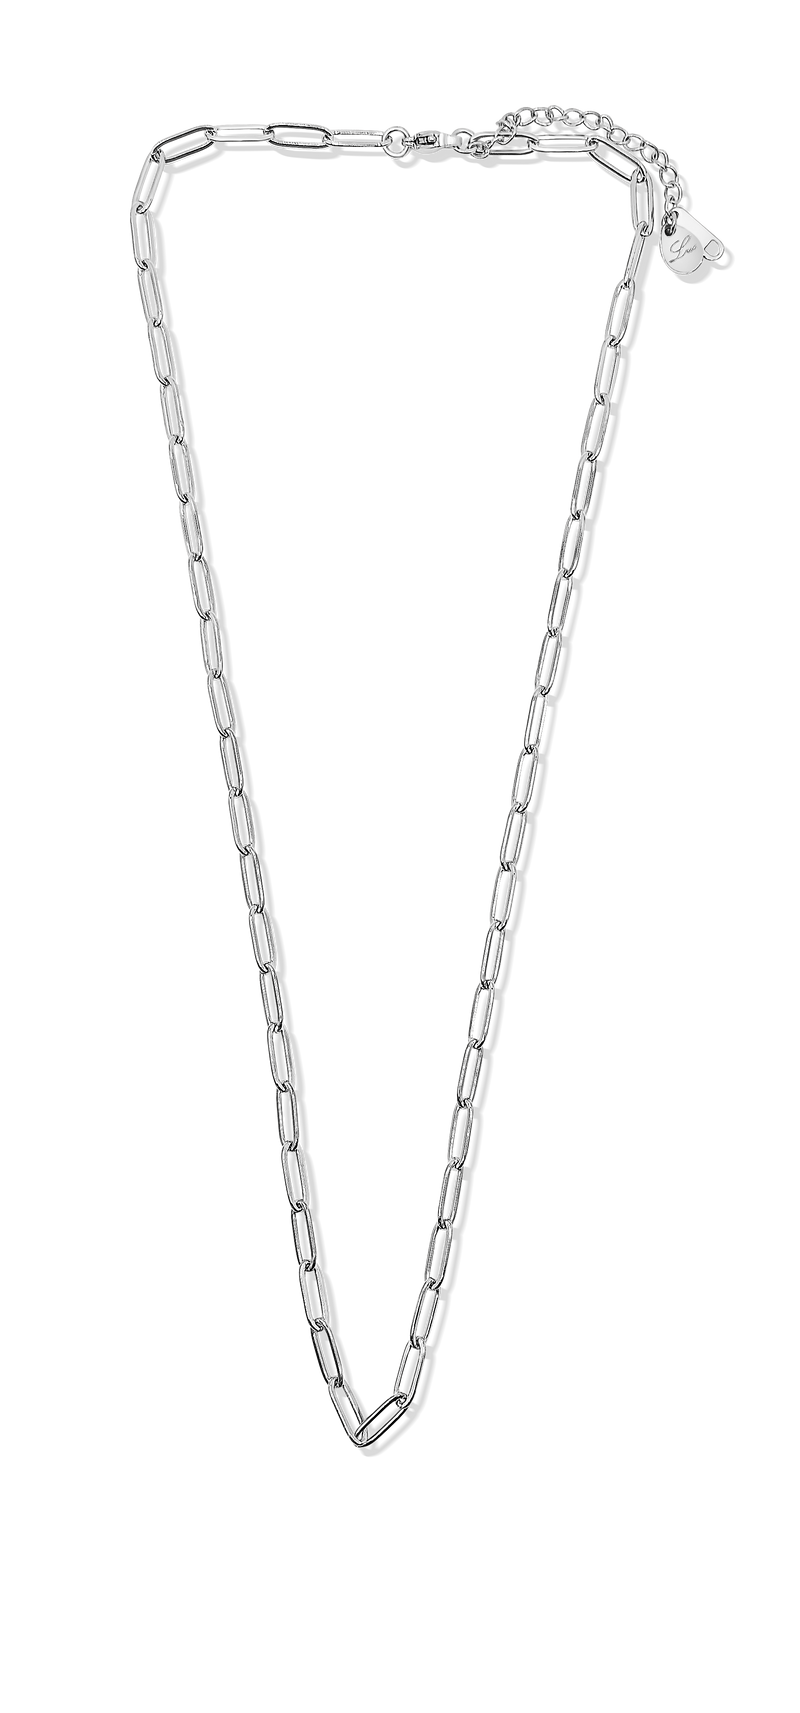 18k Gold Filled Paperclip Chain Choker Layering Necklace